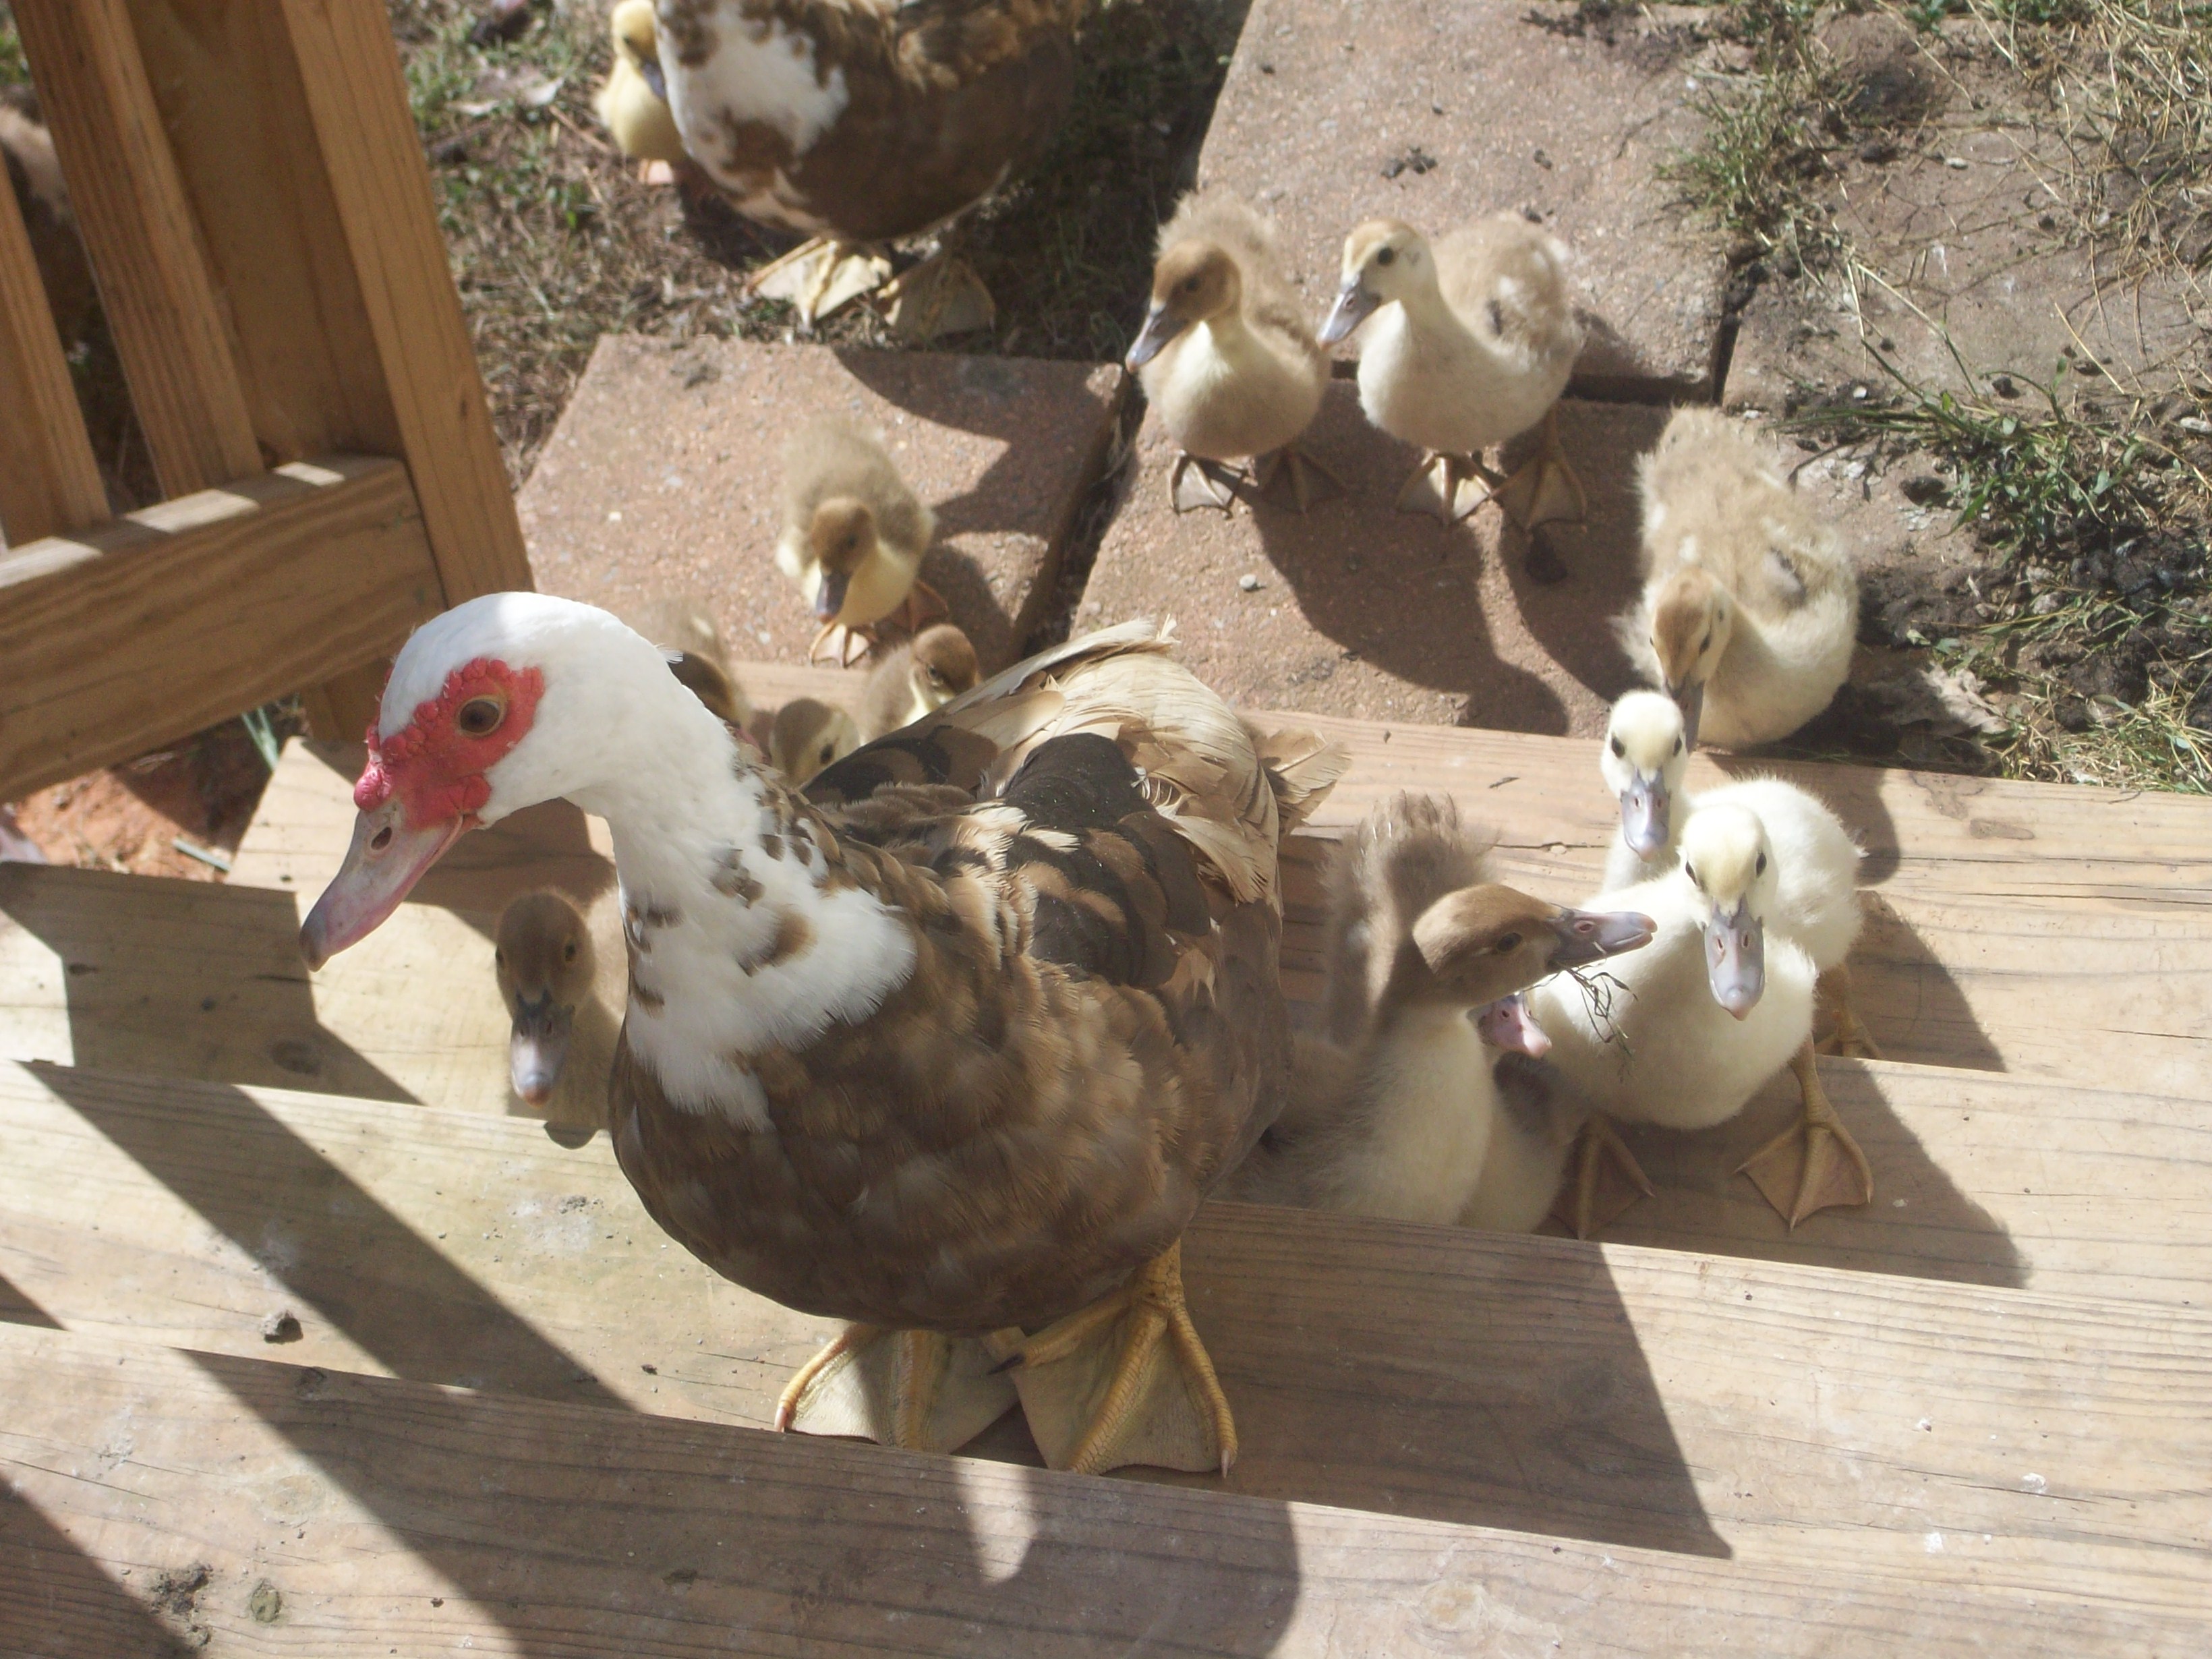 2012 Ducklings are growing up!